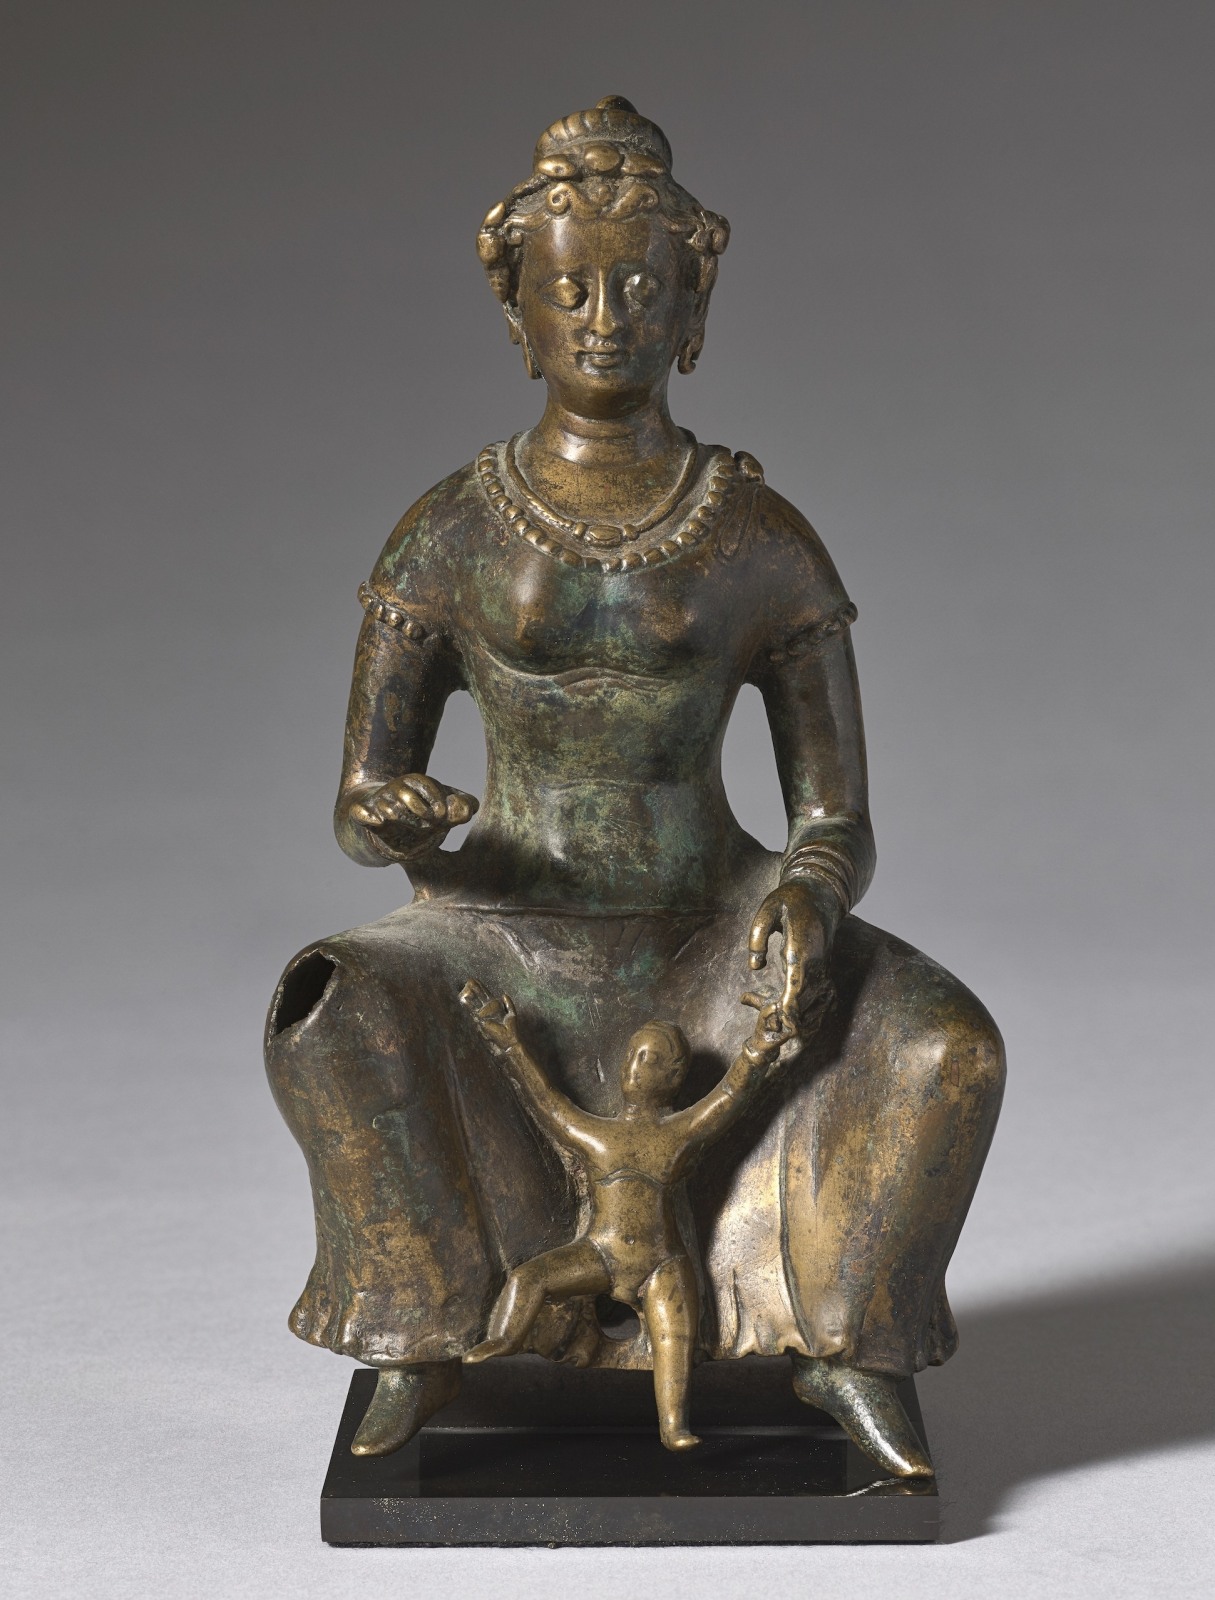 Same image of a Small bronze sculpture of a seated mother with her child playing between her legs